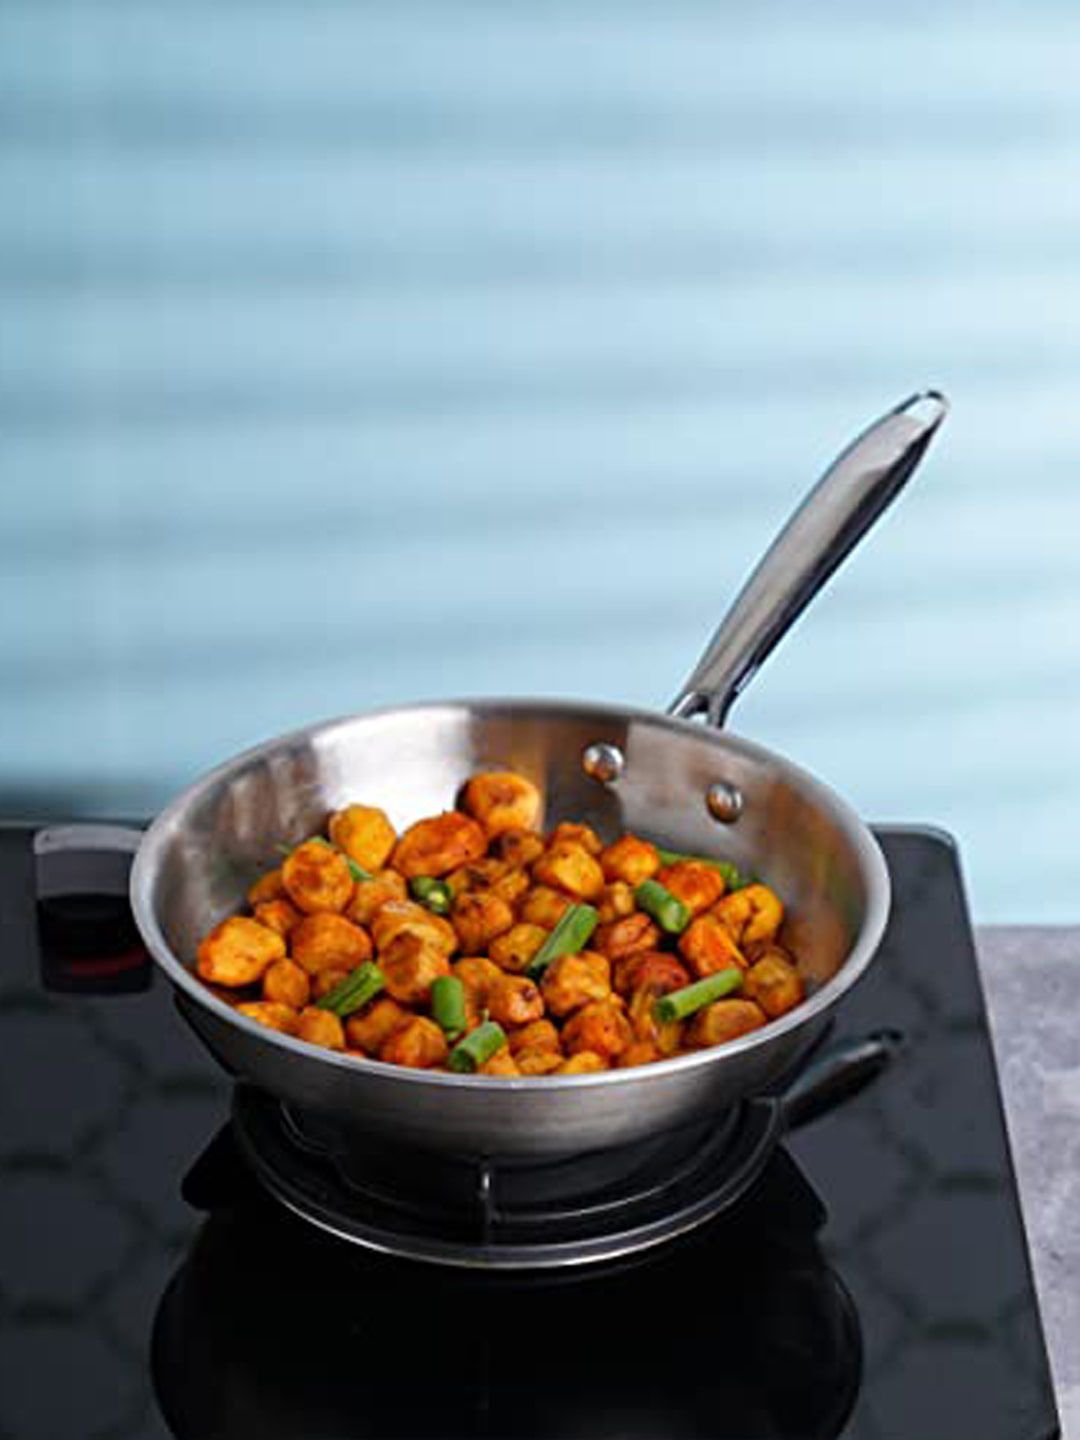 The Indus Valley Solid Stainless Steel Fry Pan Price in India